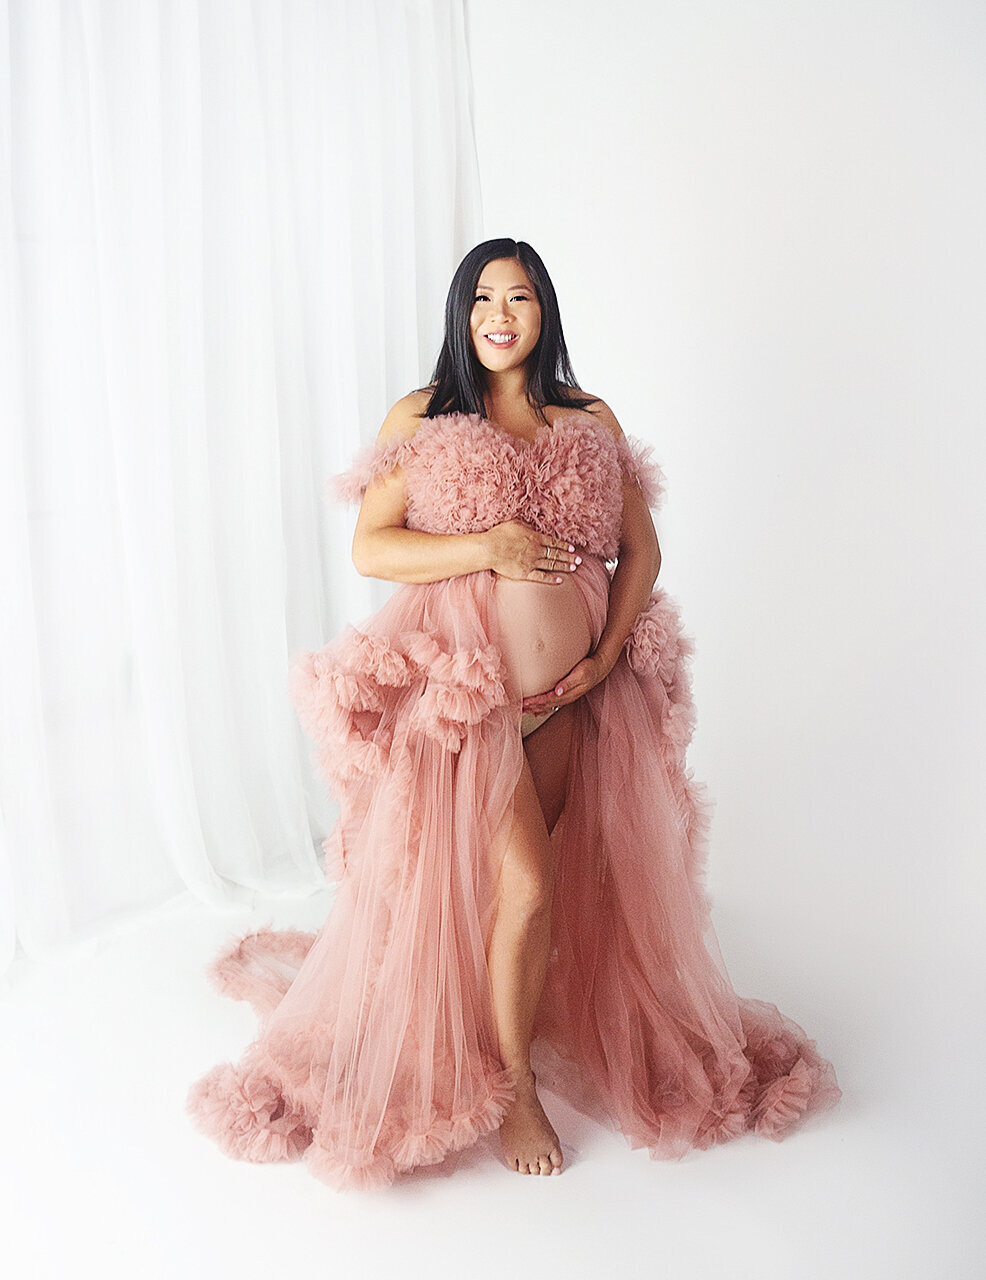 Woment wearing pink maternity gown